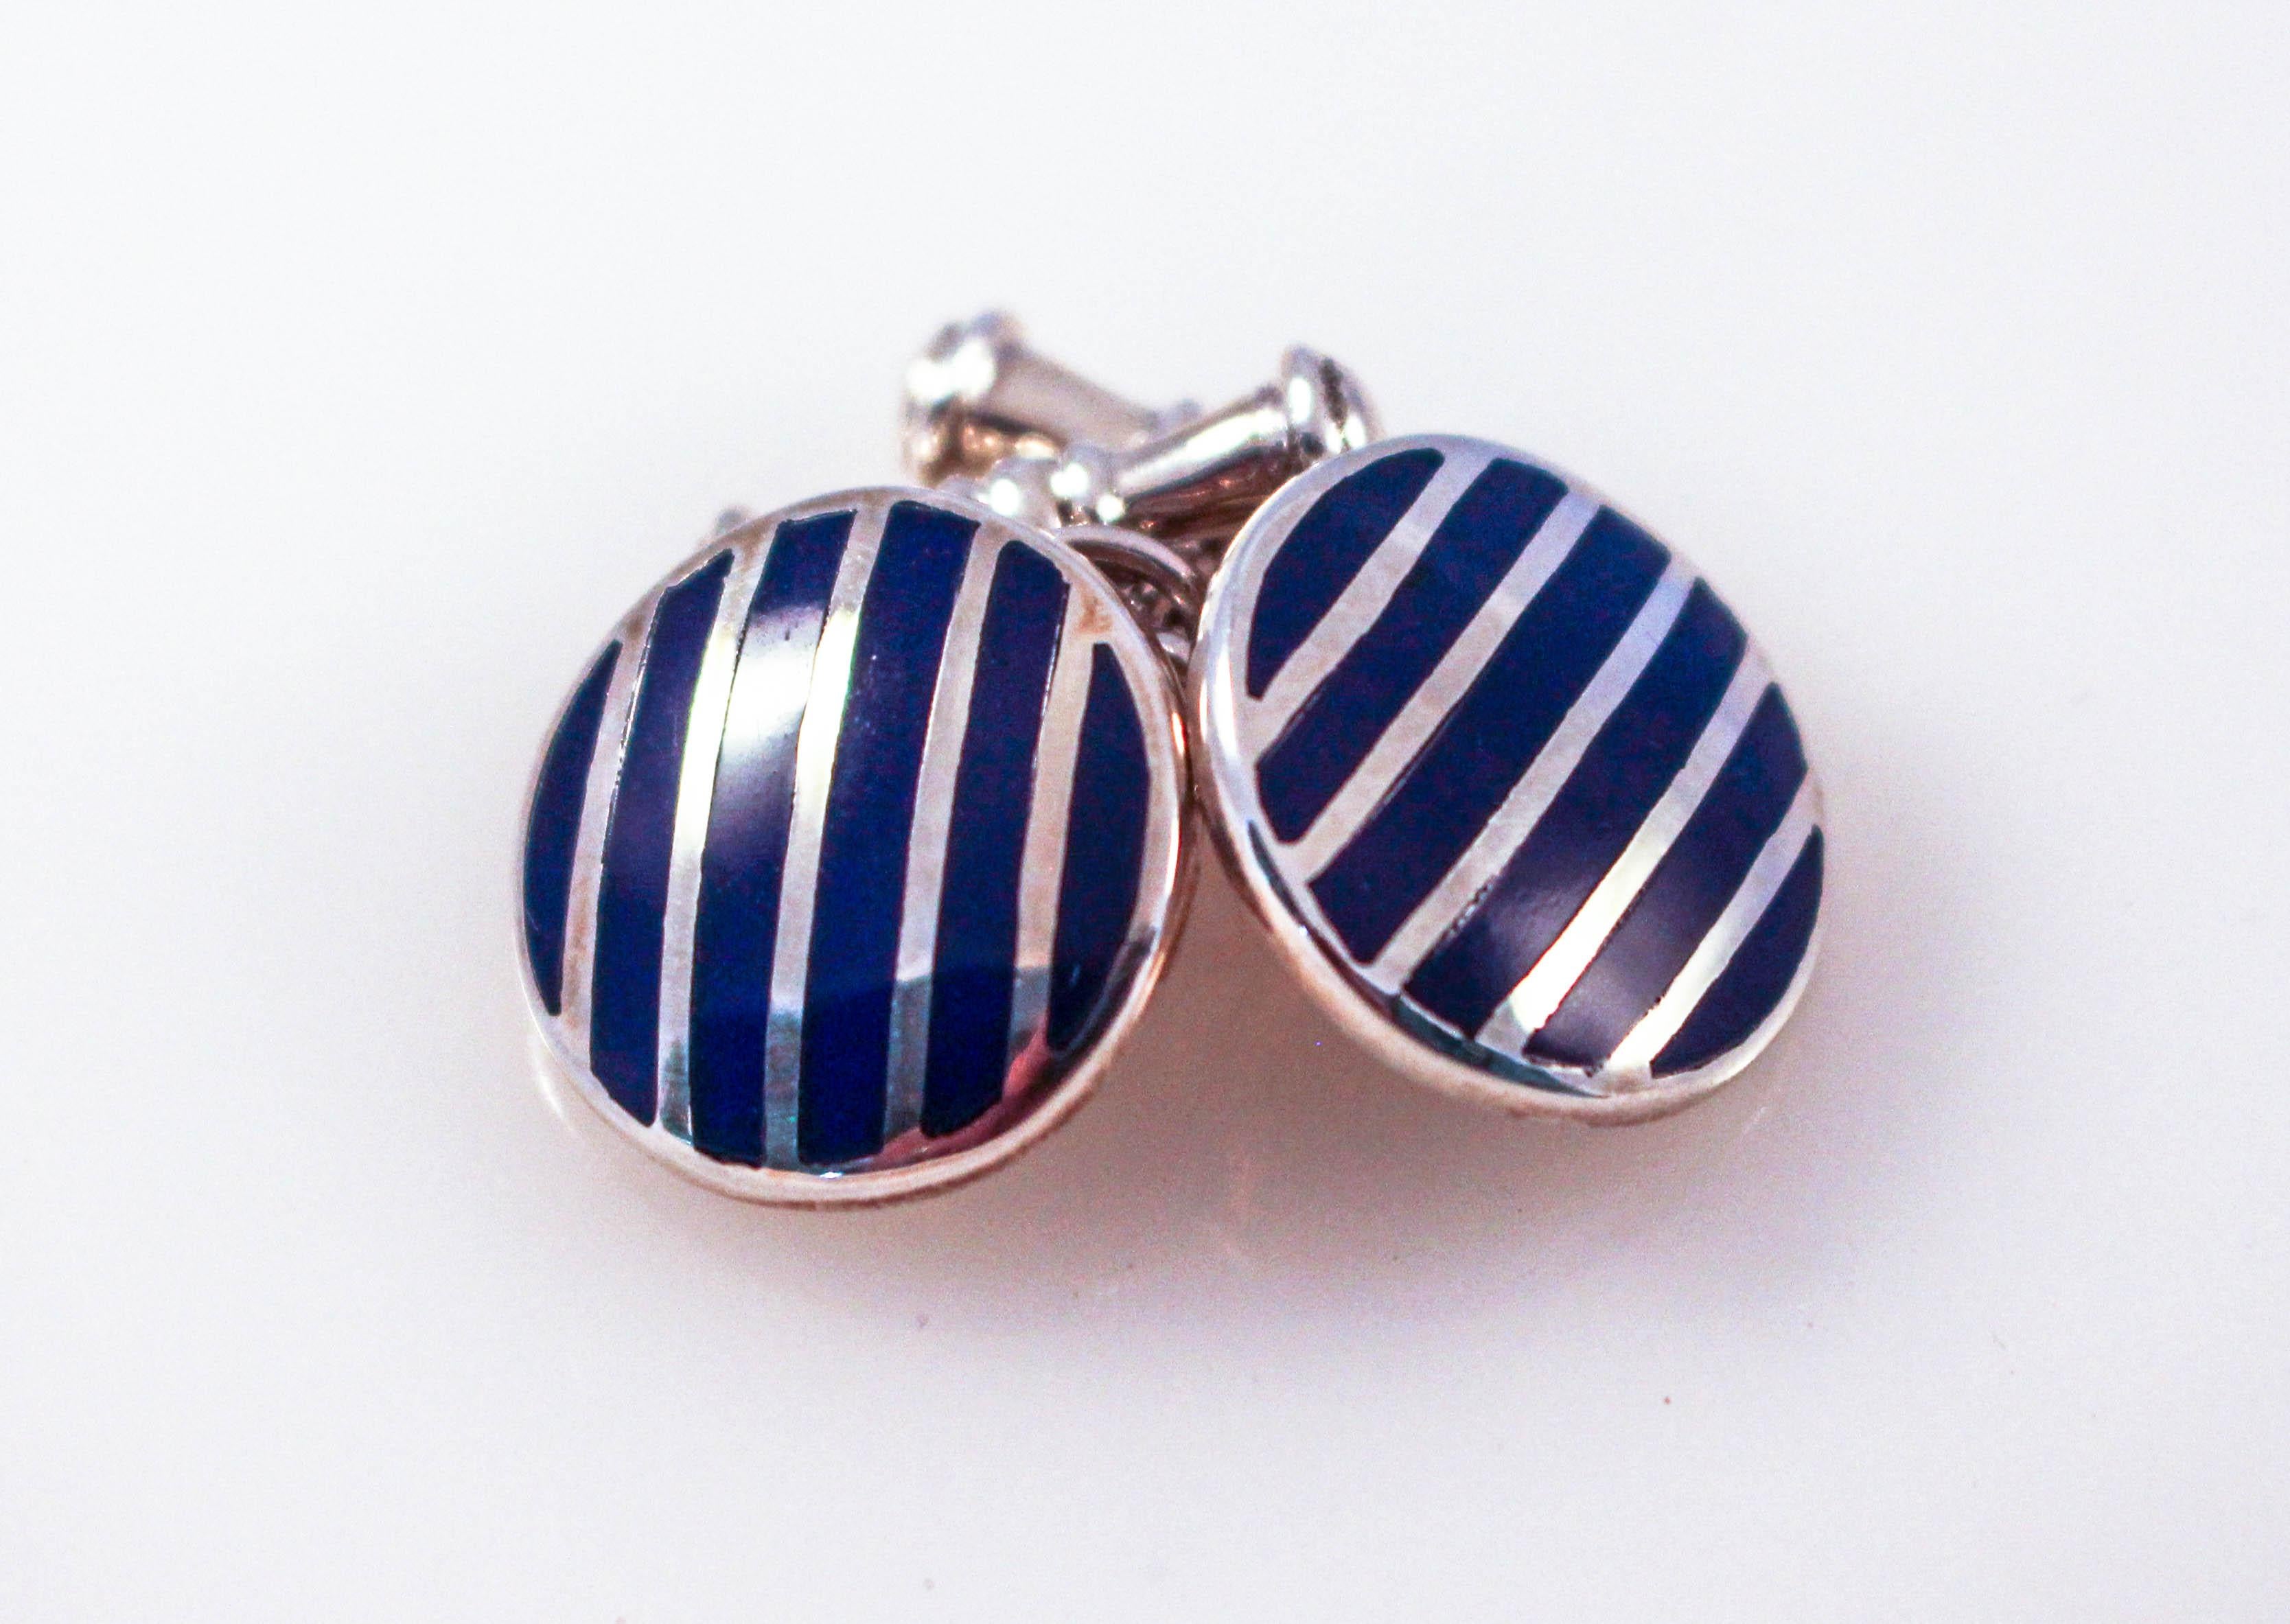 Just in time for Father’s Day and/or graduation, we are offering these sterling silver cufflinks. Made in England, they are blue with a silver stripes across the front. They pop-out and give color and style to an otherwise serious look. They can be